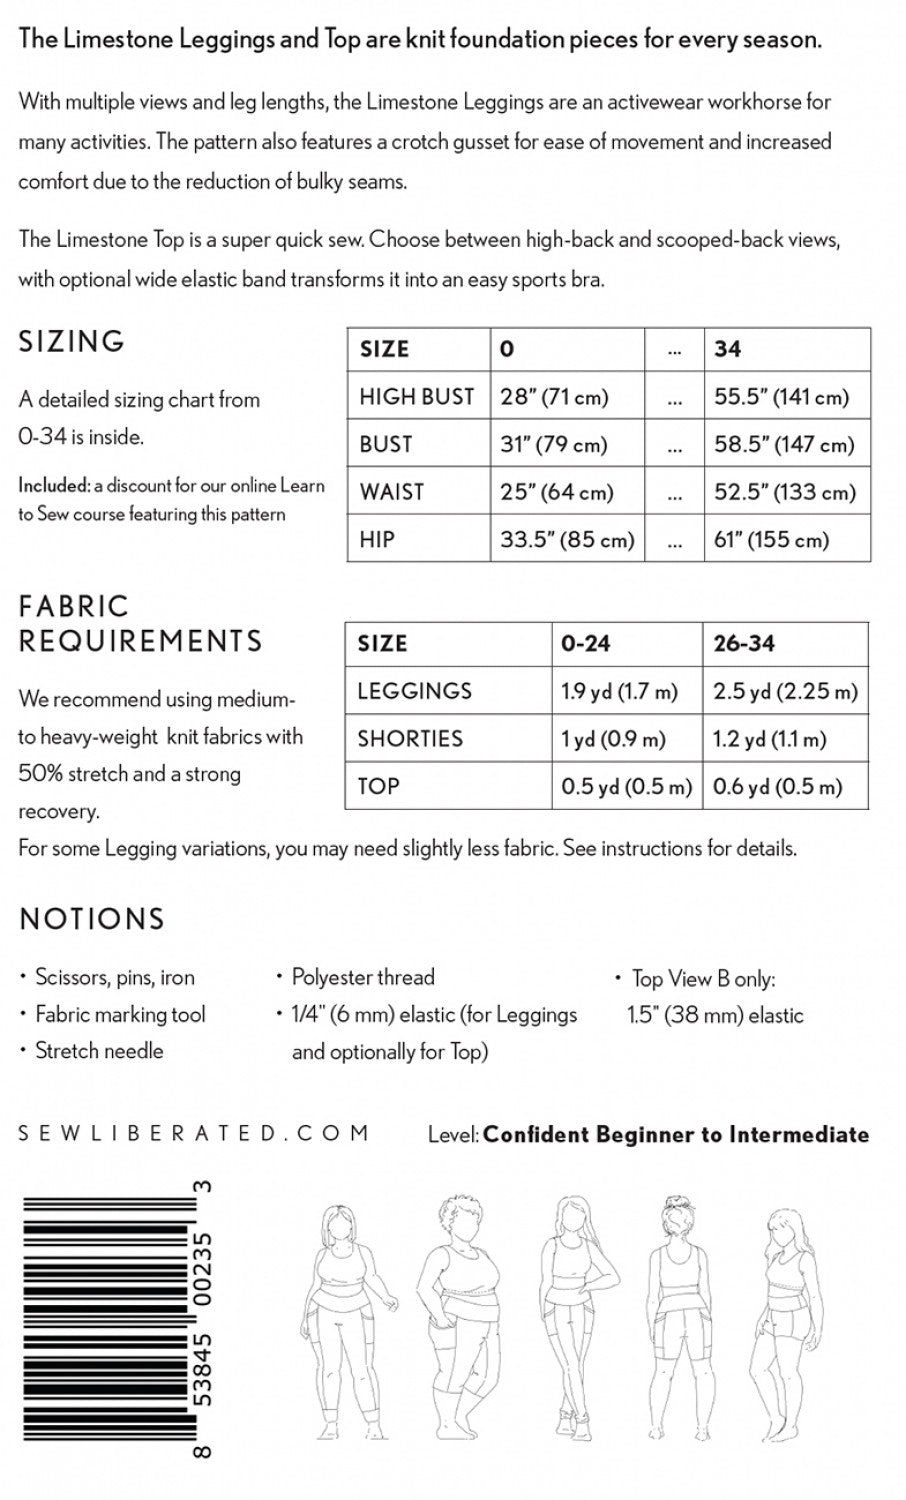 Limestone Leggings & Top - By Sew Liberated Patterns